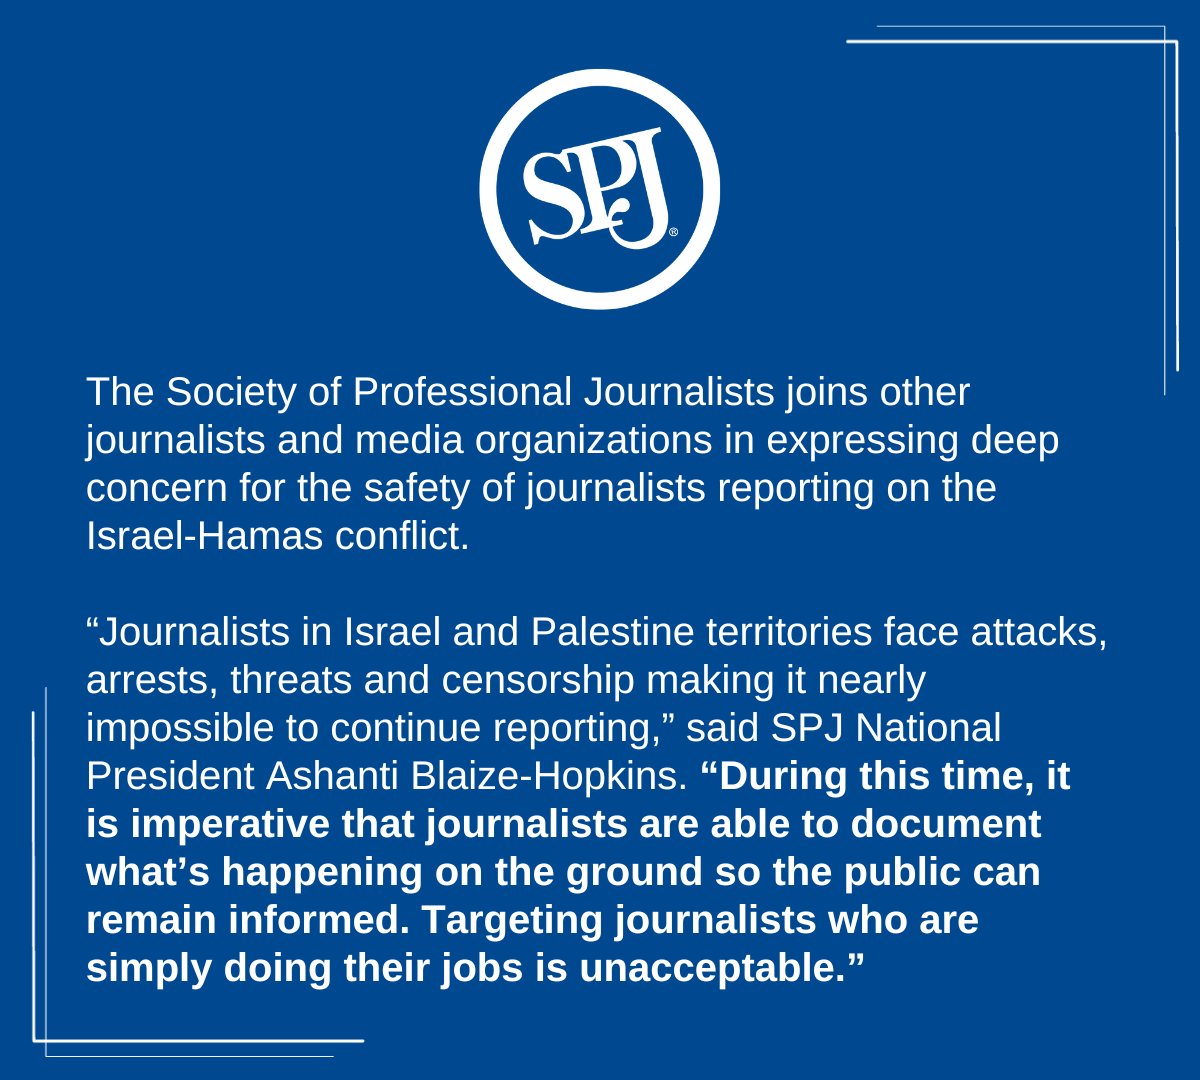 SPJ calls for the protection of journalists working in Gaza. 'During this time, it is imperative that journalists are able to document what’s happening on the ground so the public can remain informed,' said SPJ President @AshantiBlaize. spj.org/news.asp?REF=2…